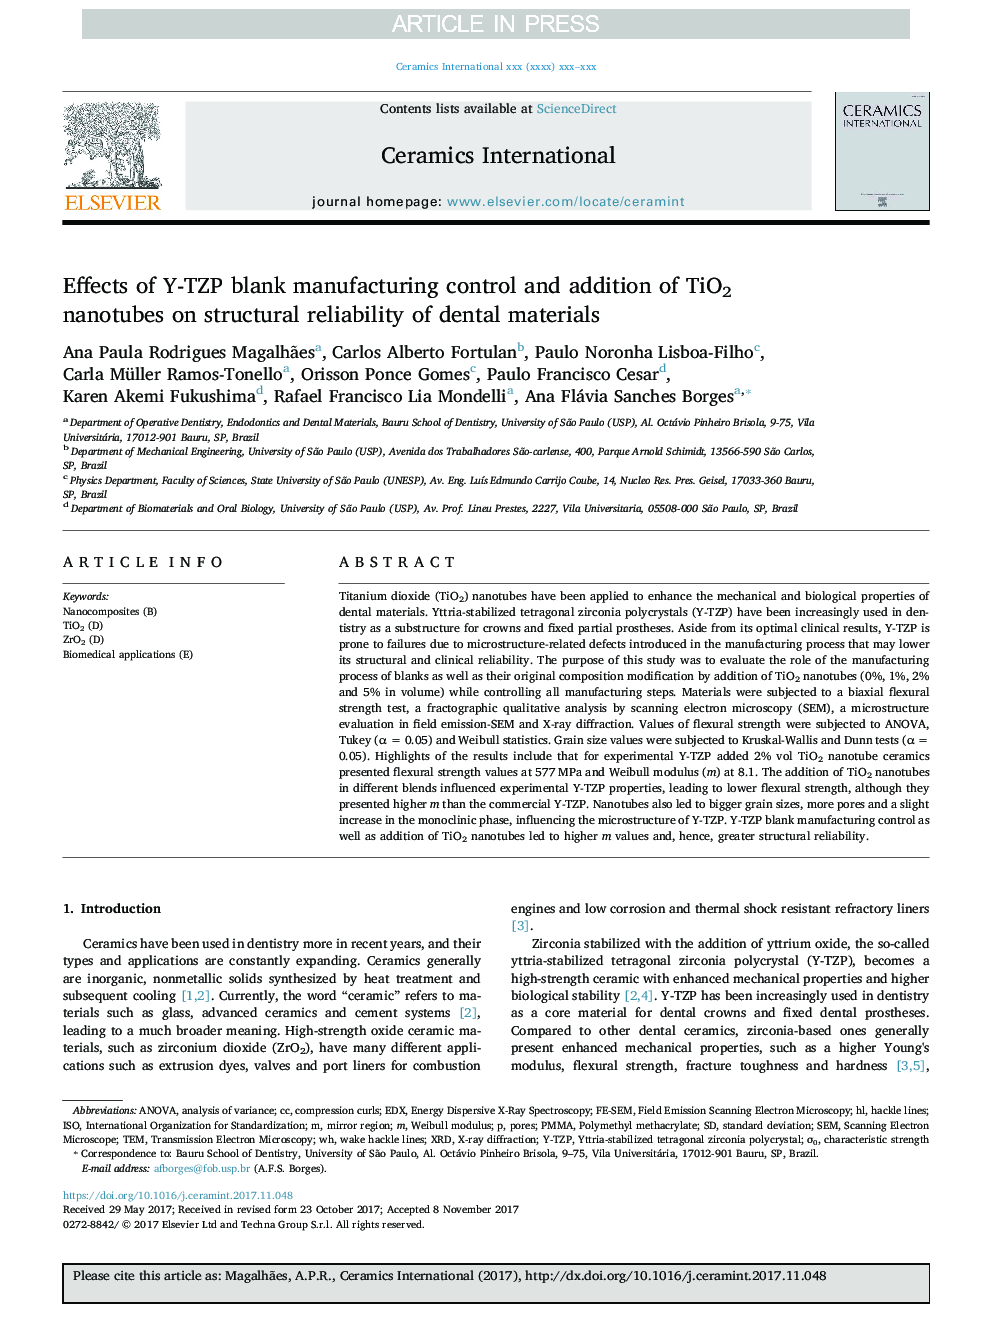 Effects of Y-TZP blank manufacturing control and addition of TiO2 nanotubes on structural reliability of dental materials